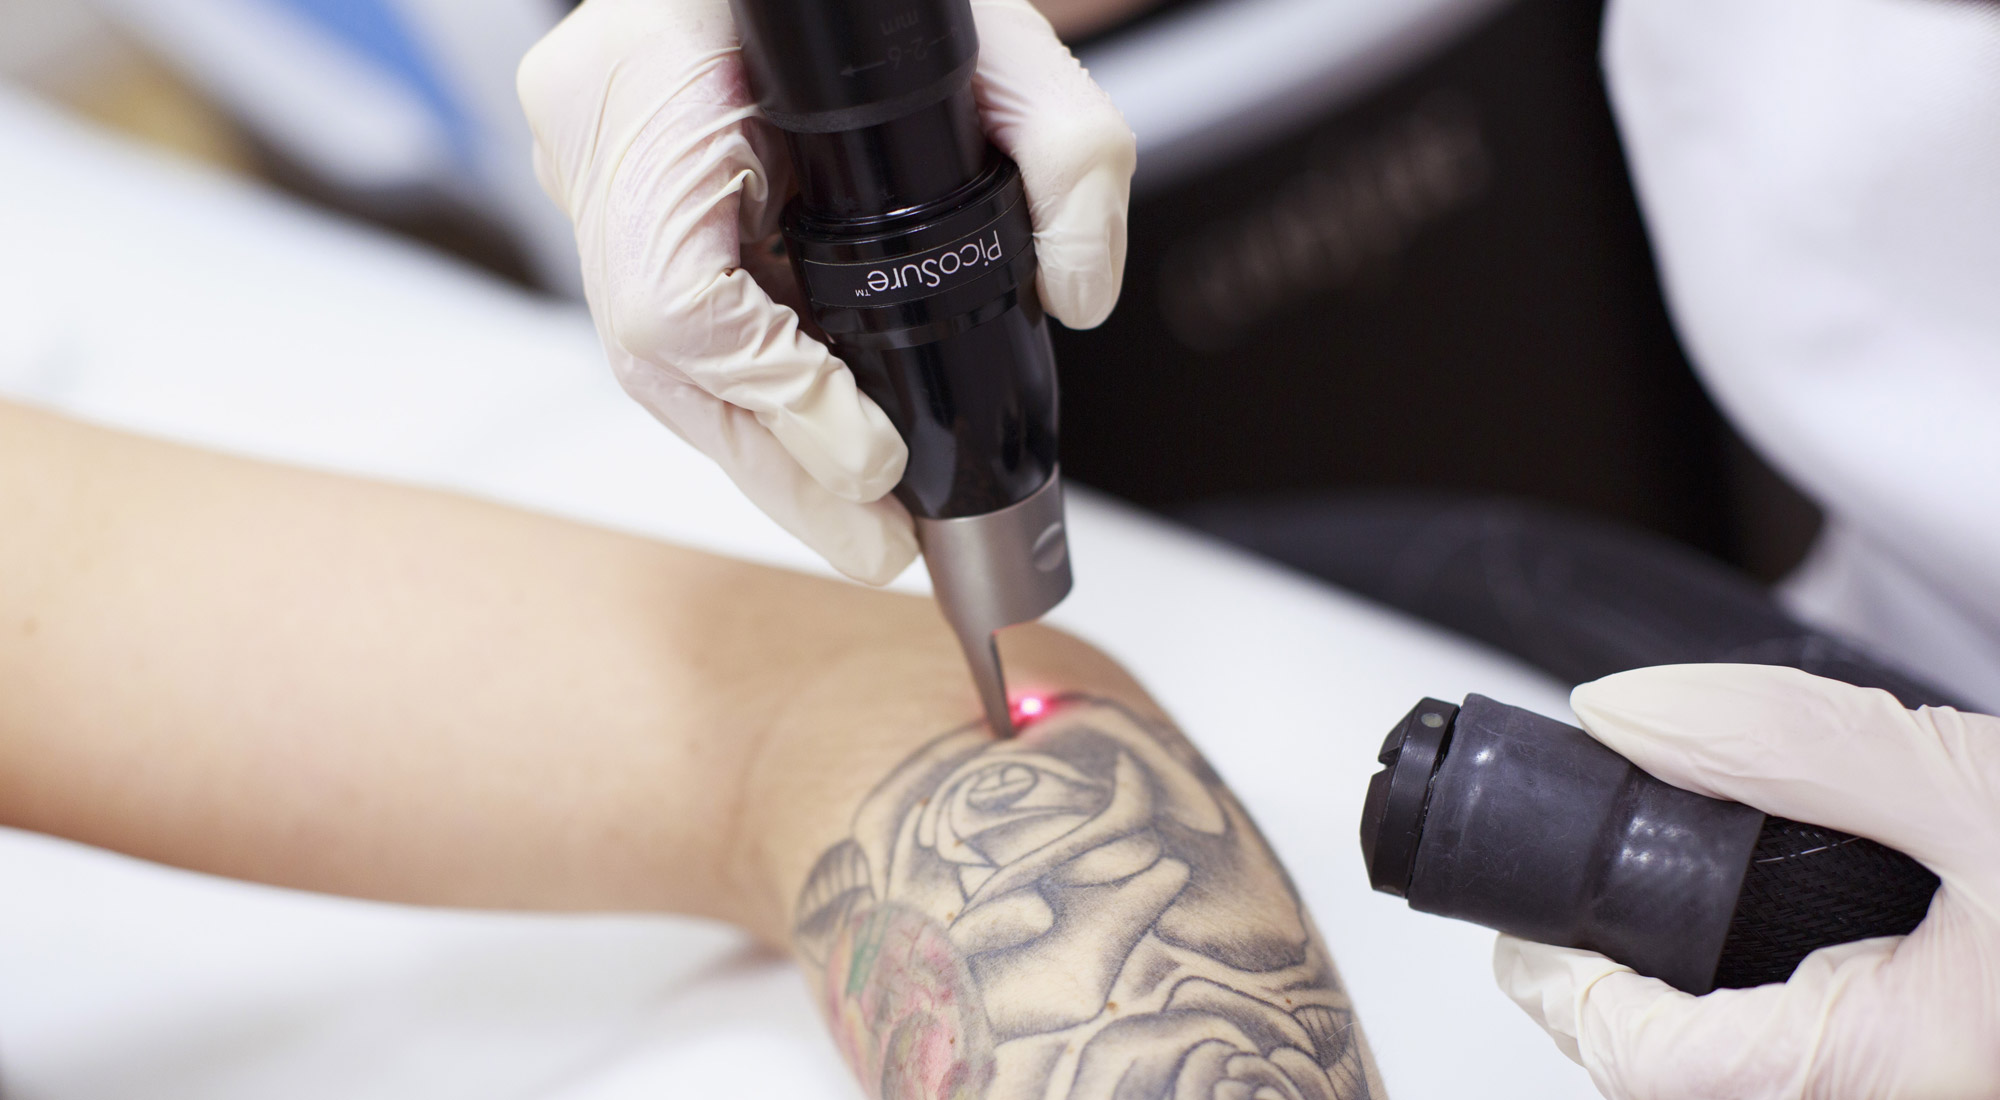 Newcastle tattoo removal